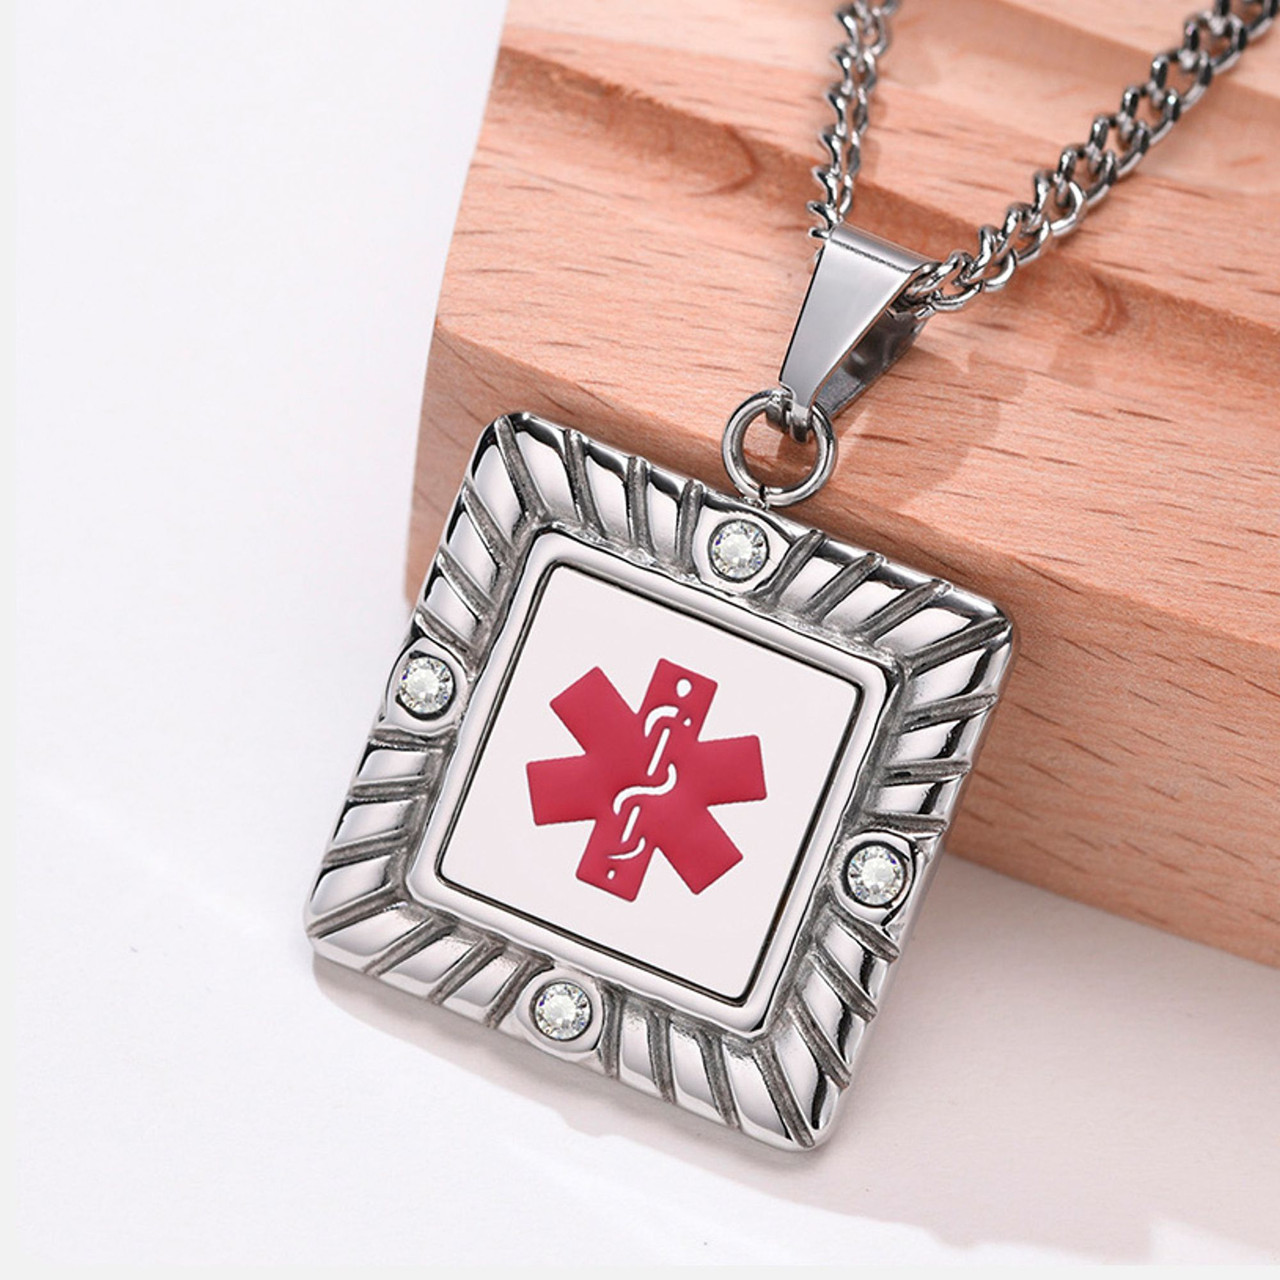 Medical Alert Necklaces in Silver and Leather